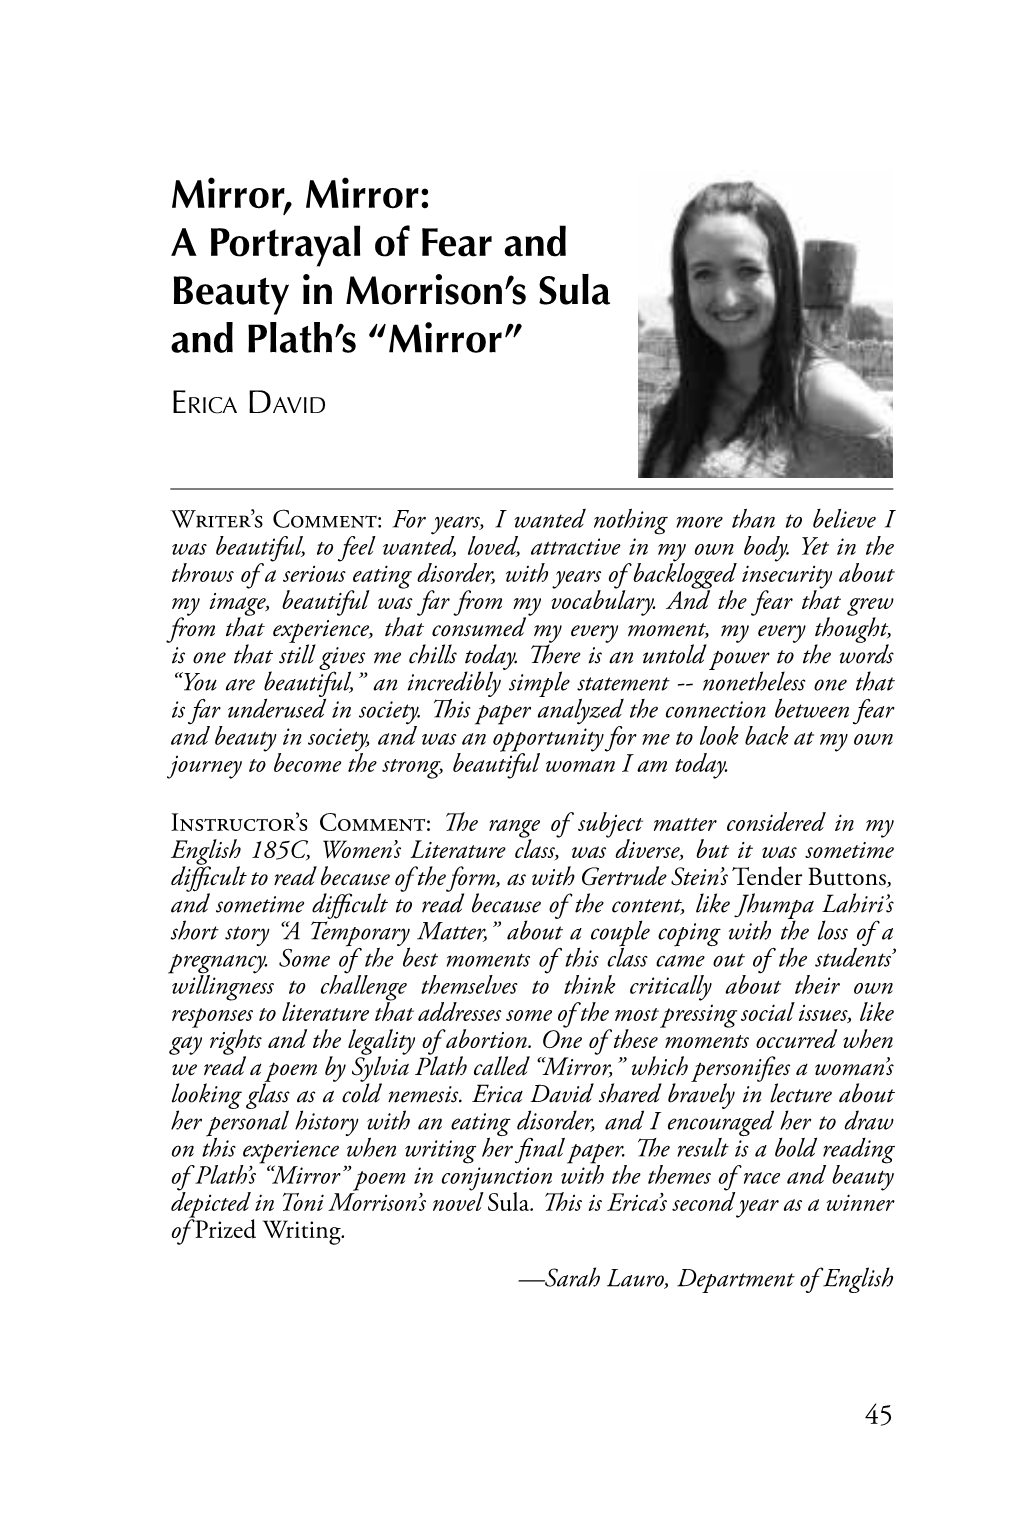 A Portrayal of Fear and Beauty in Morrison's Sula and Plath's “Mirror”